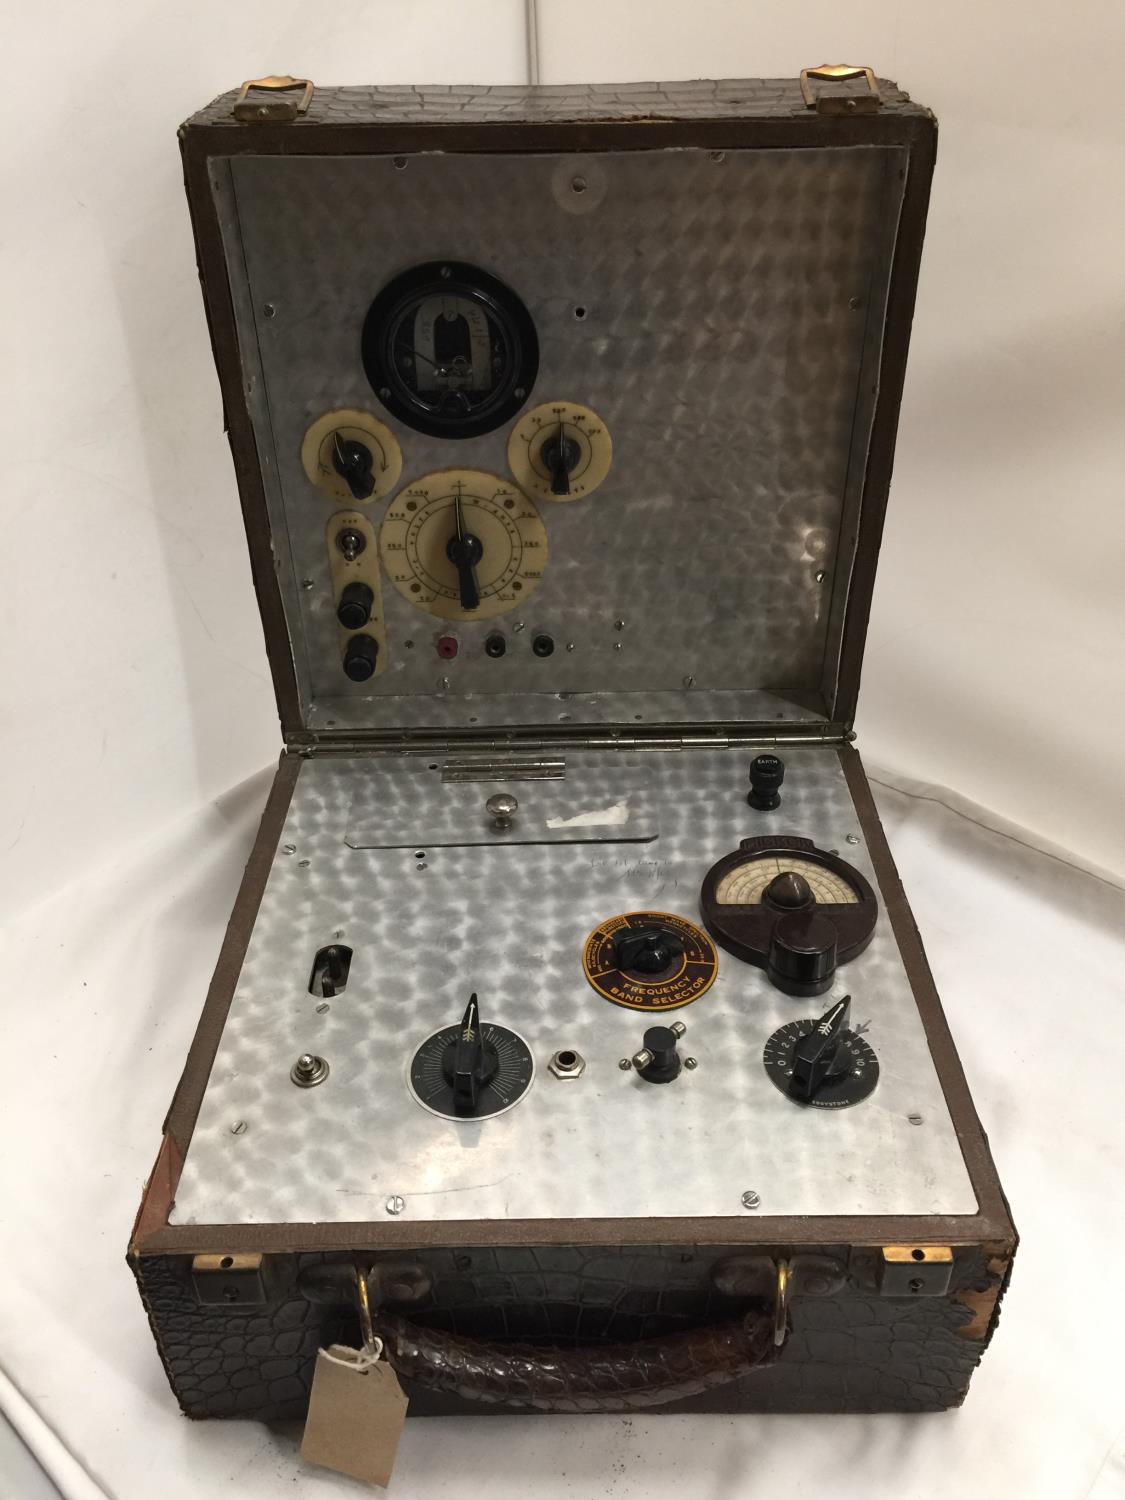 A MID 20TH CENTURY BRITISH TRANSCEIVER SUITCASE RADIO, SIMILAR TO ONES USED BY THE S.O.E FIELD - Image 2 of 10